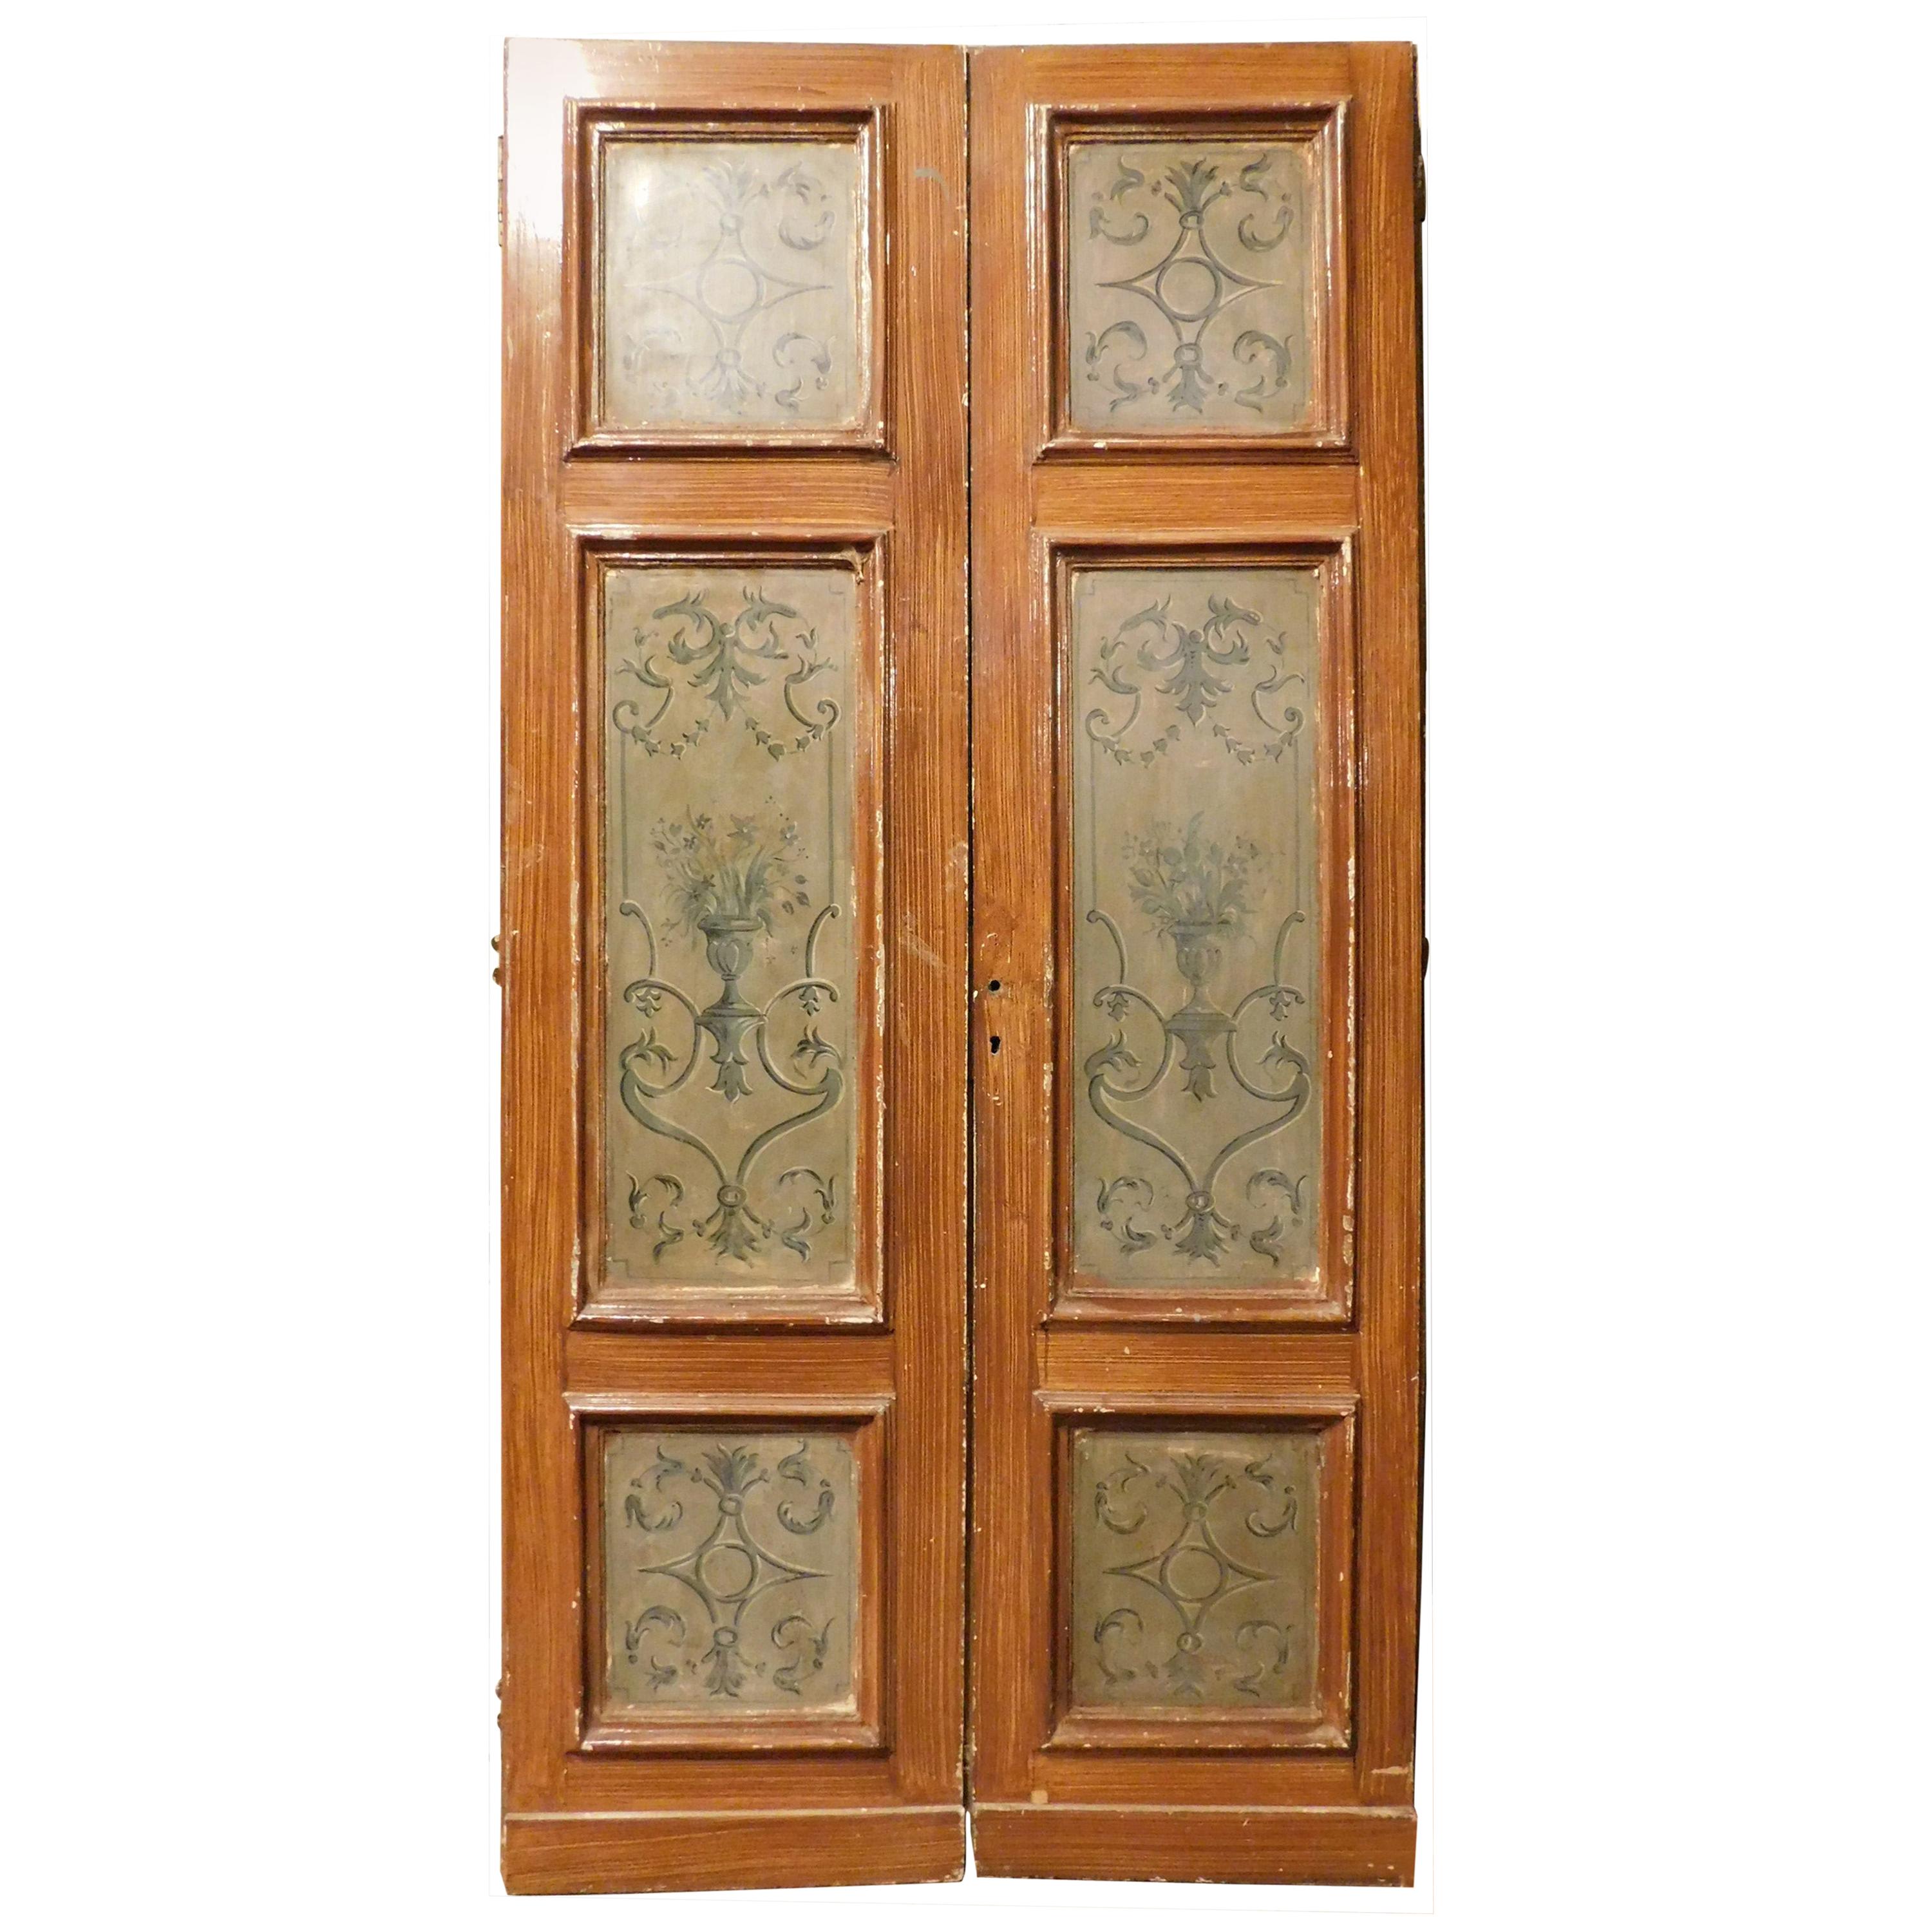 N. 6 Antique Double Doors, Lacquered and Painted, 19th Century, Italy